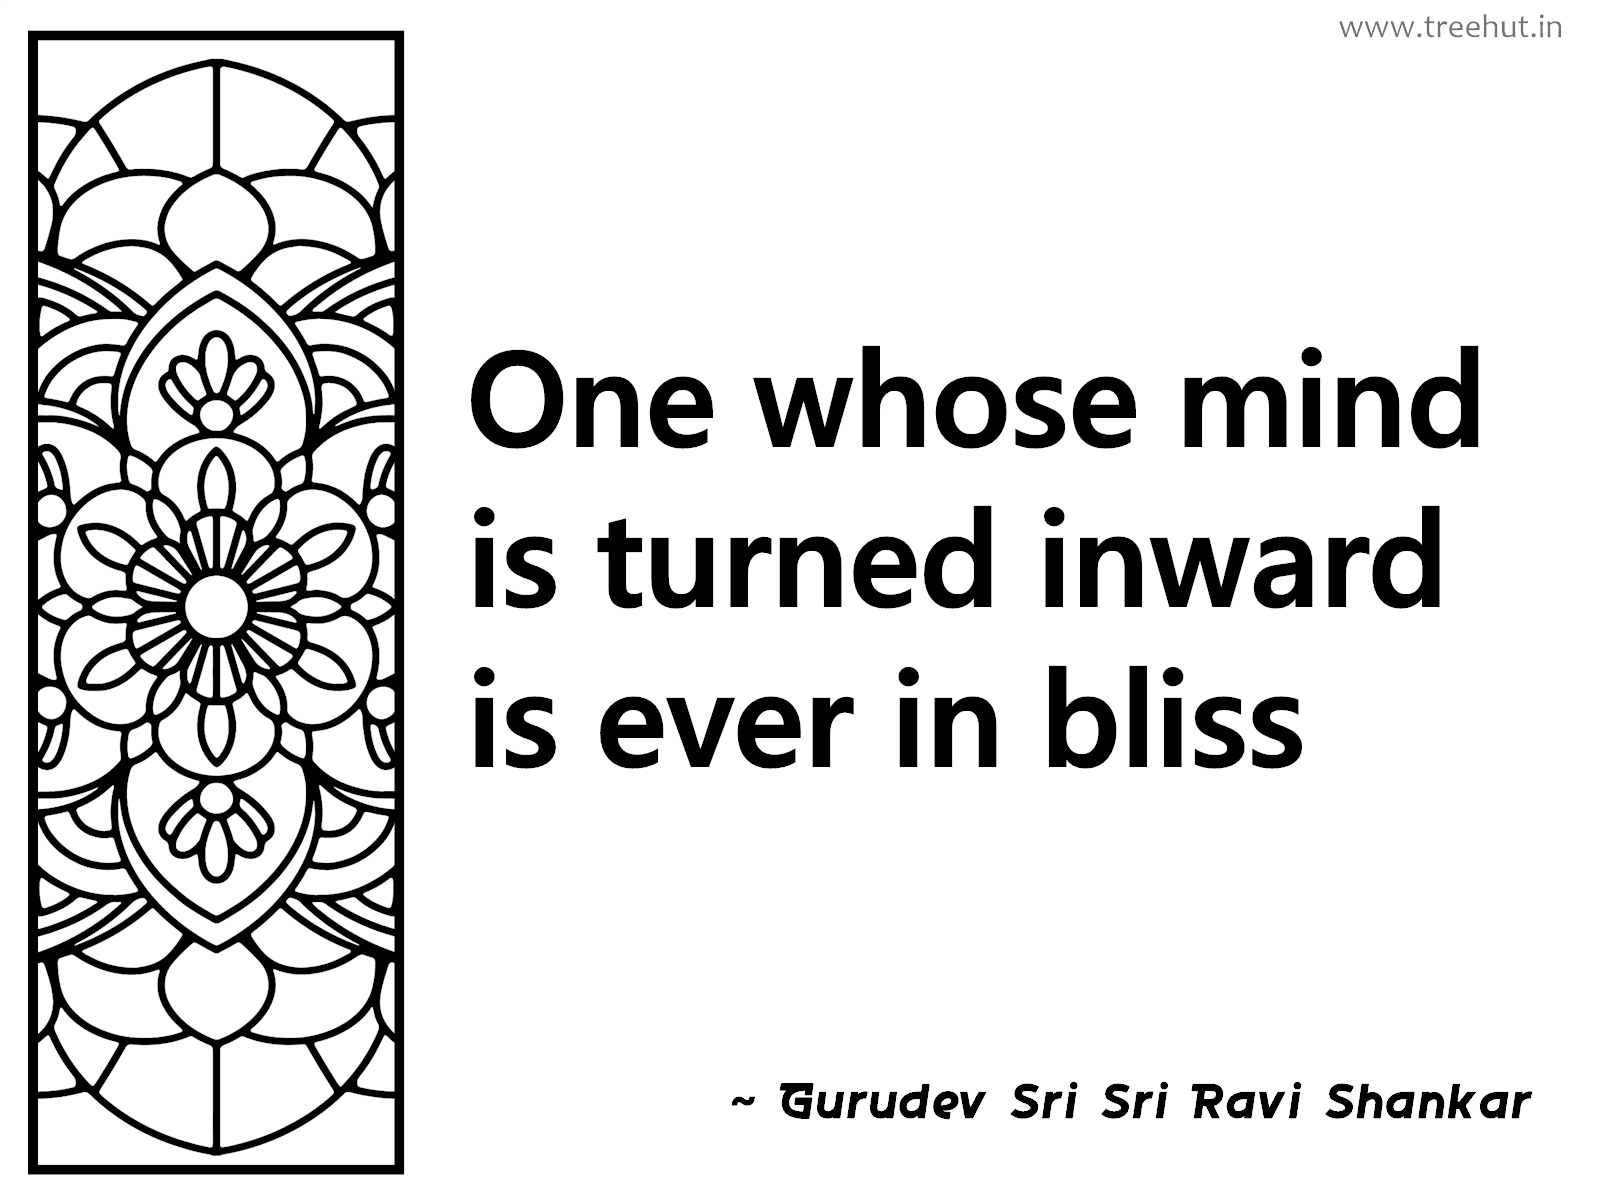 One whose mind is turned inward is ever in bliss Inspirational Quote by Gurudev Sri Sri Ravi Shankar, coloring pages